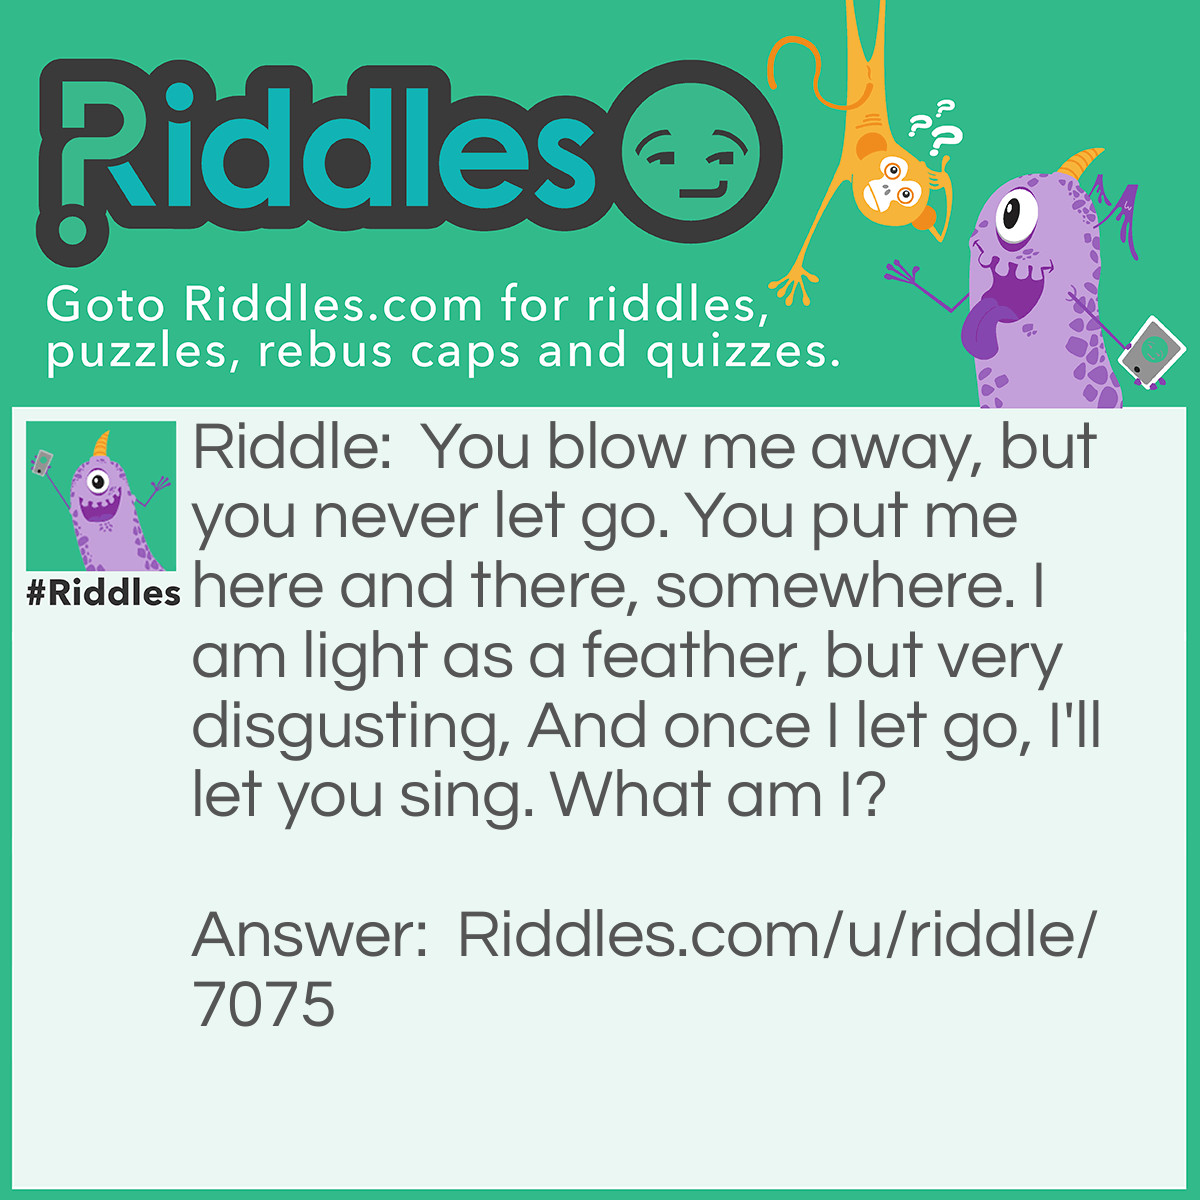 Riddle: You blow me away, but you never let go. You put me here and there, somewhere. I am light as a feather, but very disgusting, And once I let go, I'll let you sing. What am I? Answer: A tissue.